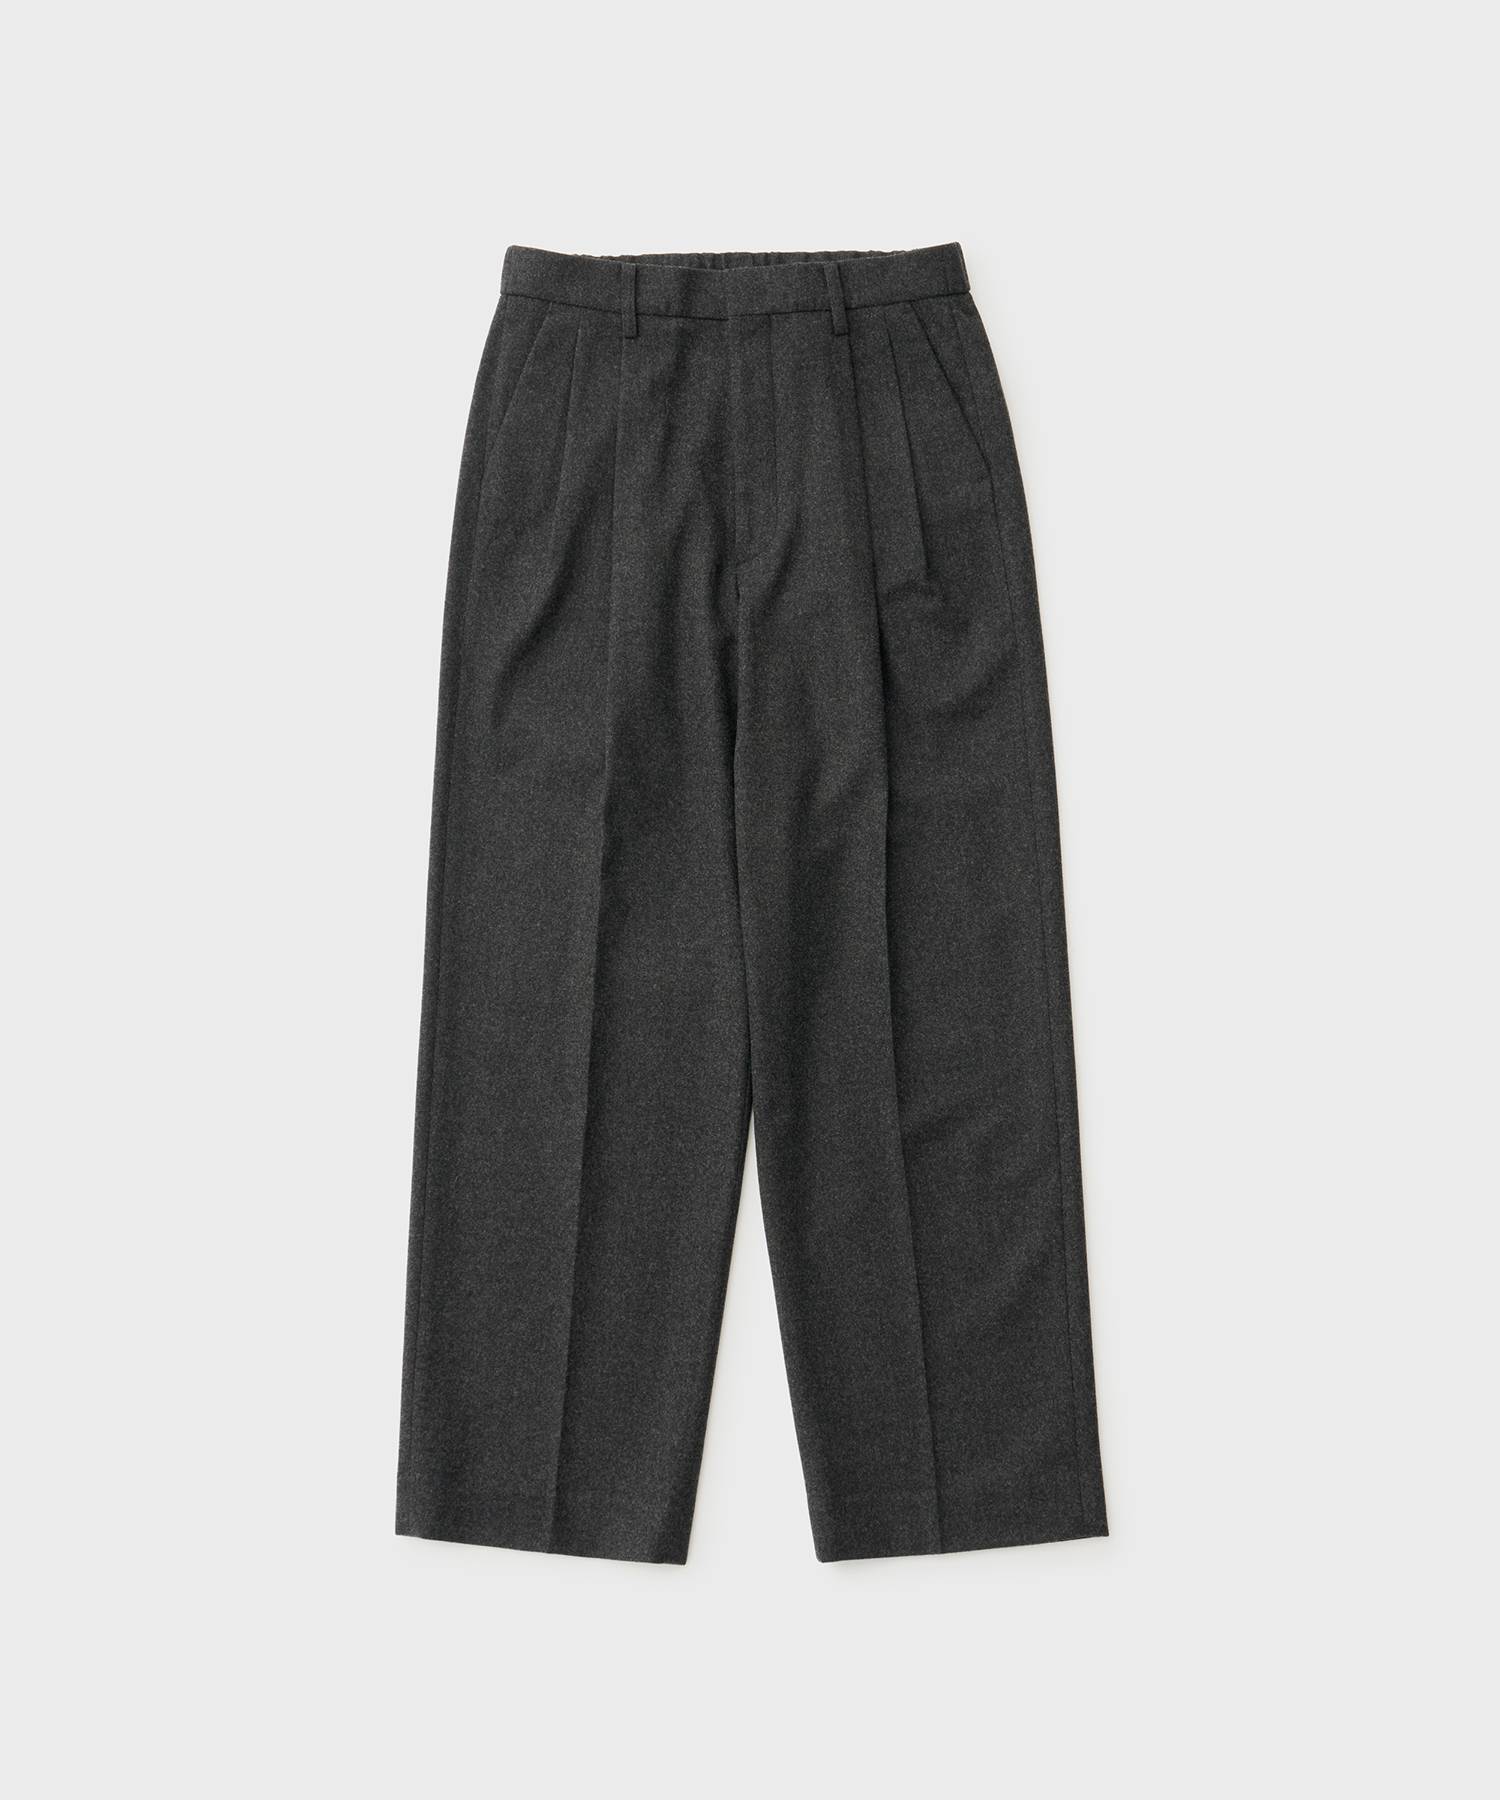 23AW Bonjour Cashmere Pants (Heather Charcoal)